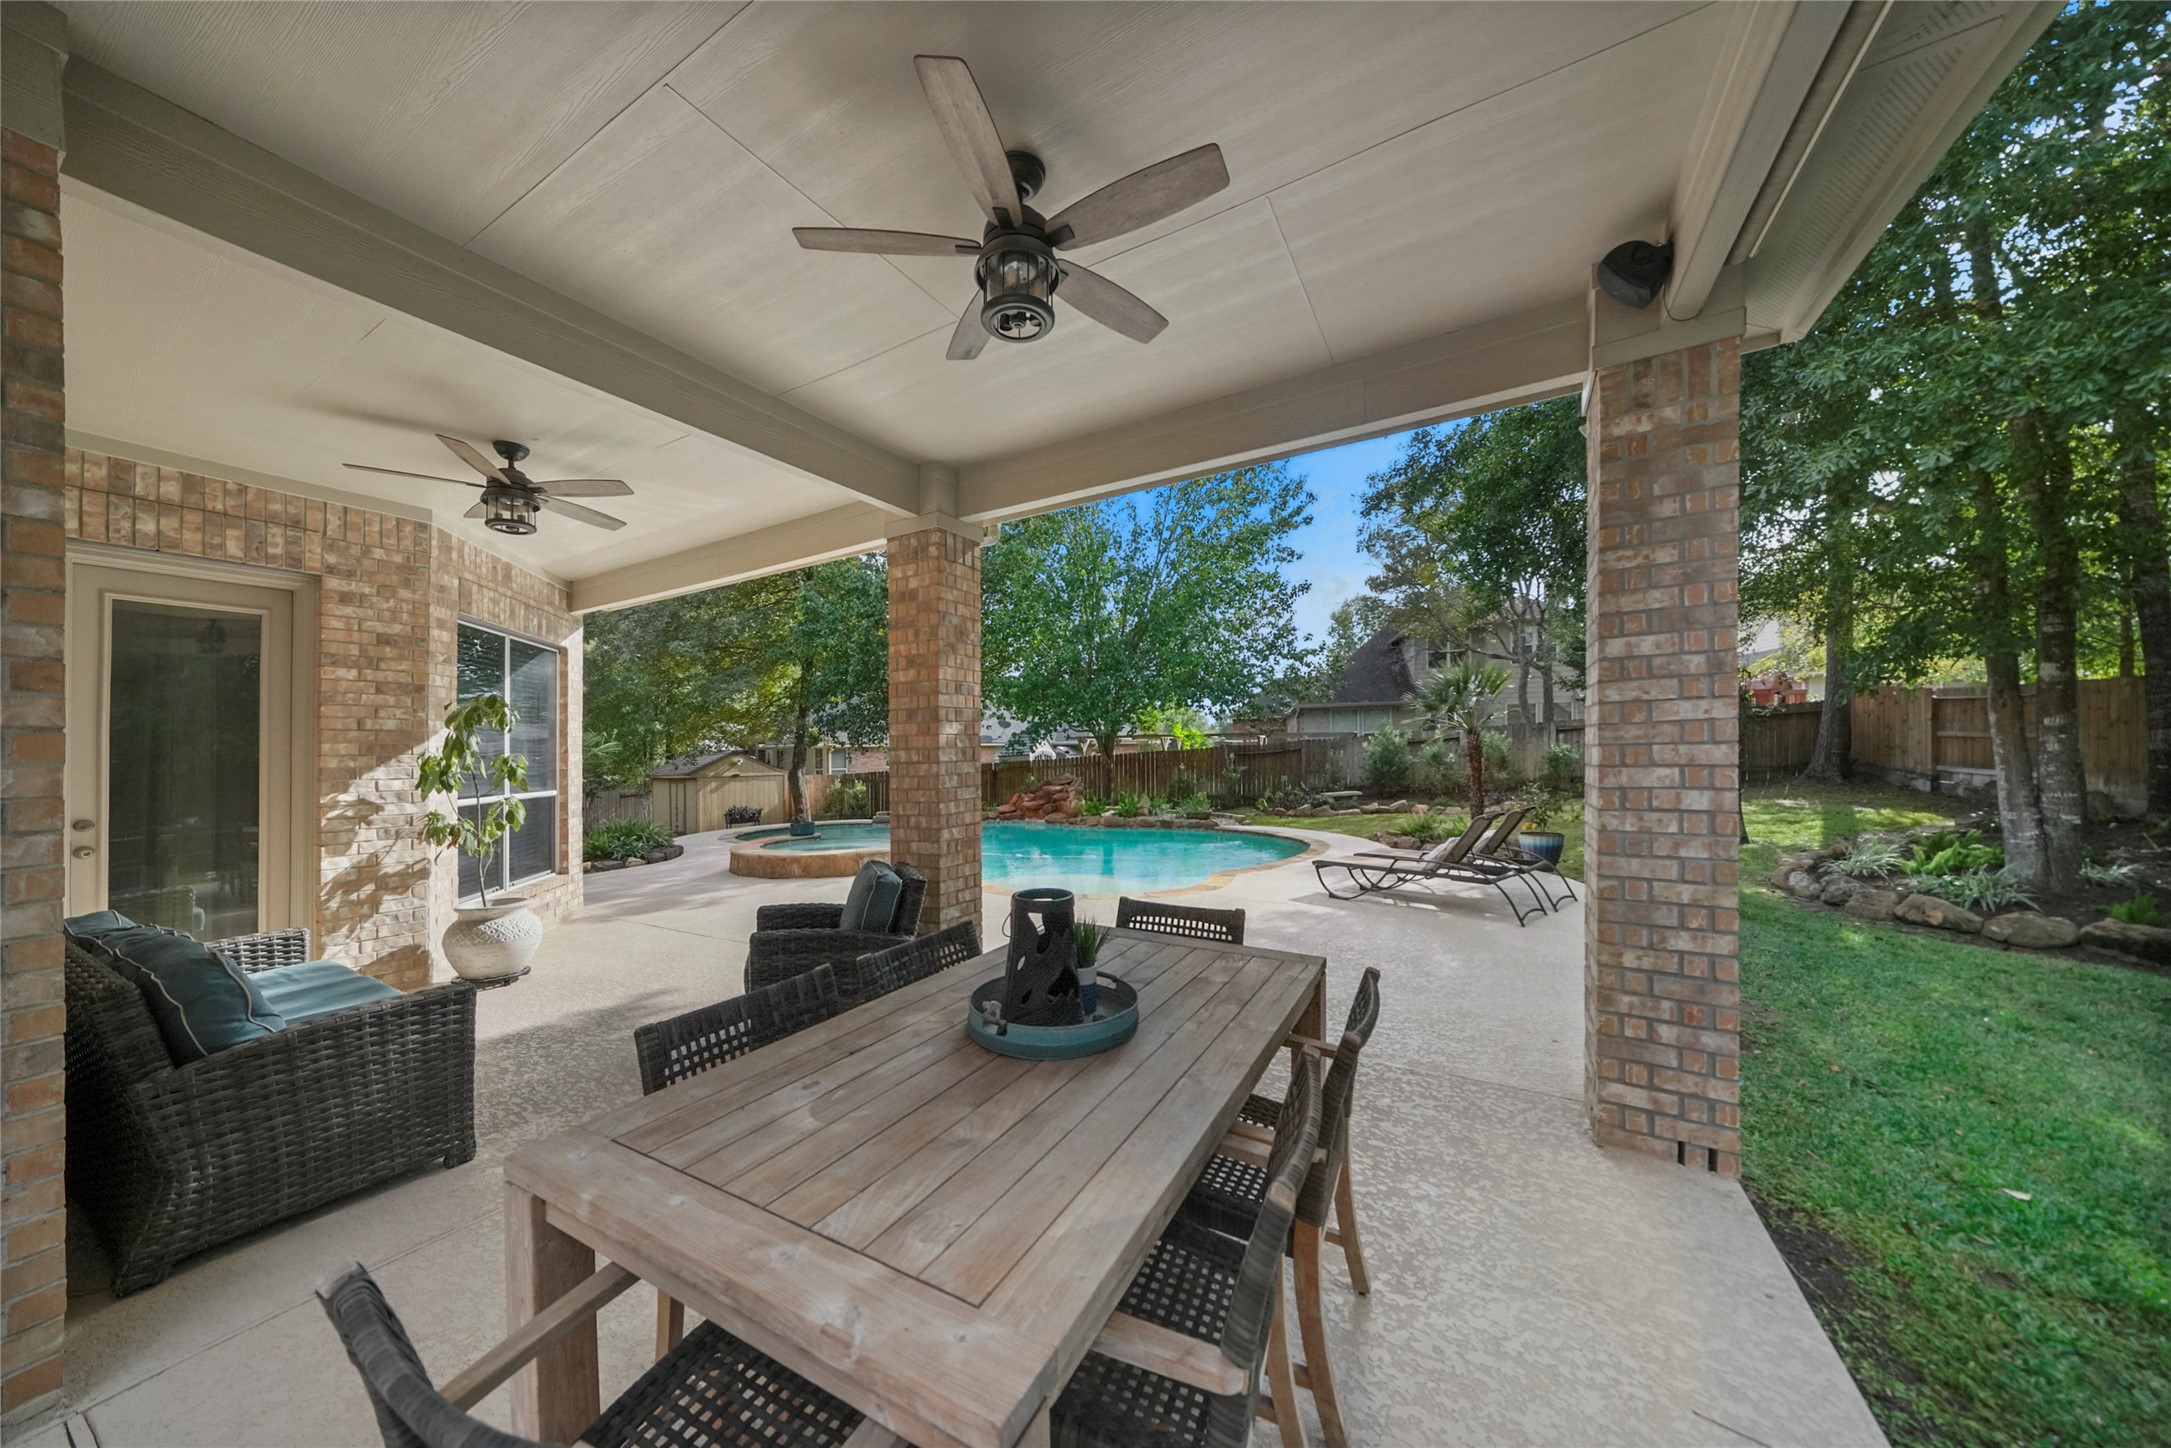 The covered patio is a comfortable space to relax or entertain.